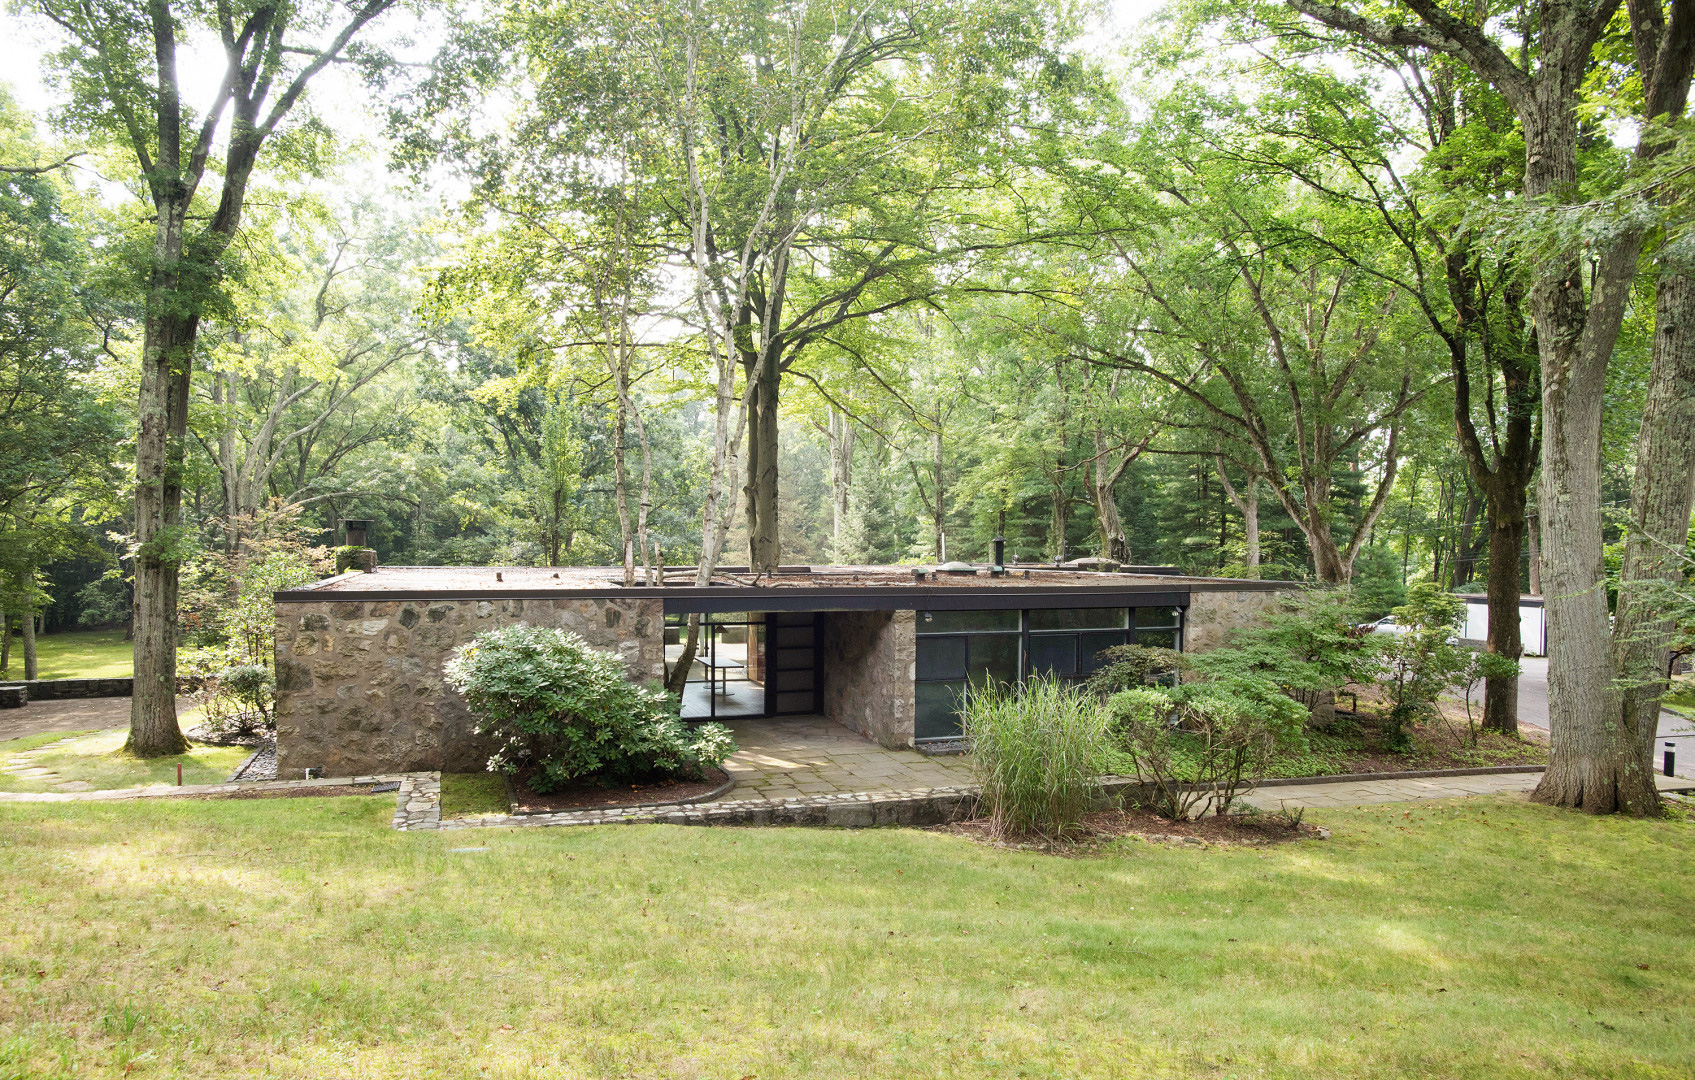 Graphic designer Paul Rand’s Connecticut home is for sale